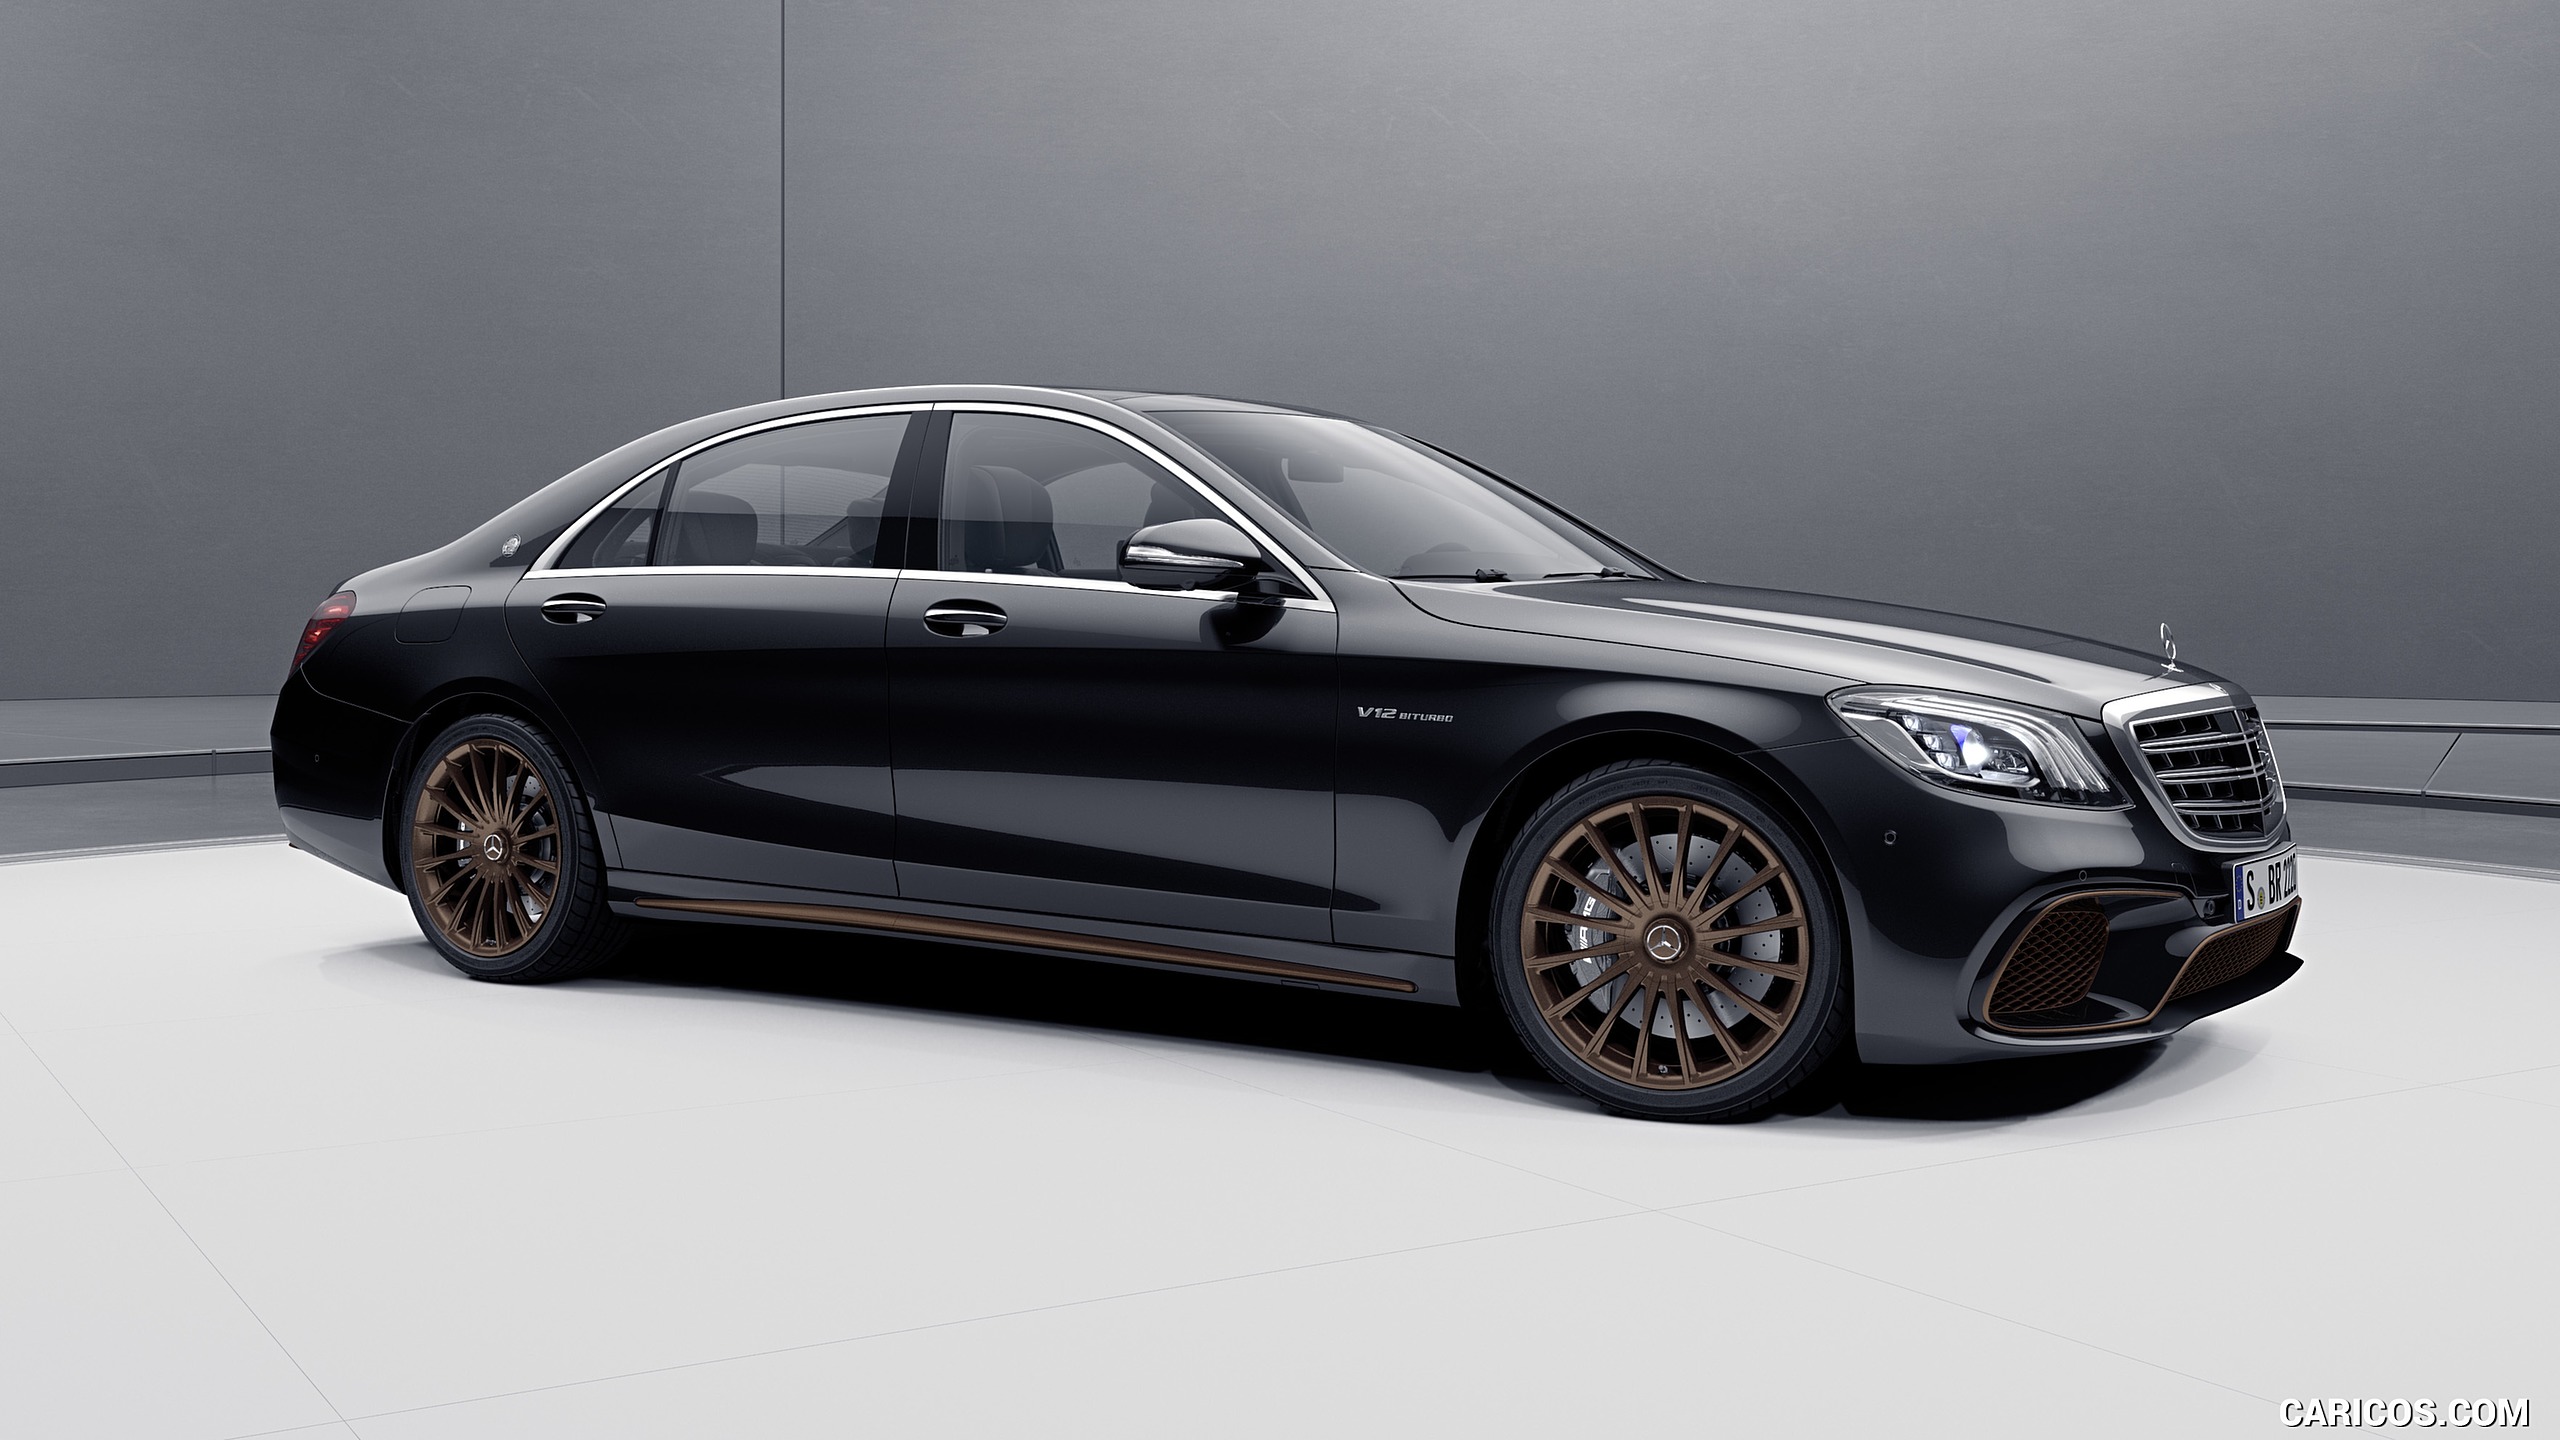 2019 Mercedes-AMG S 65 Final Edition - Front Three-Quarter, #1 of 10